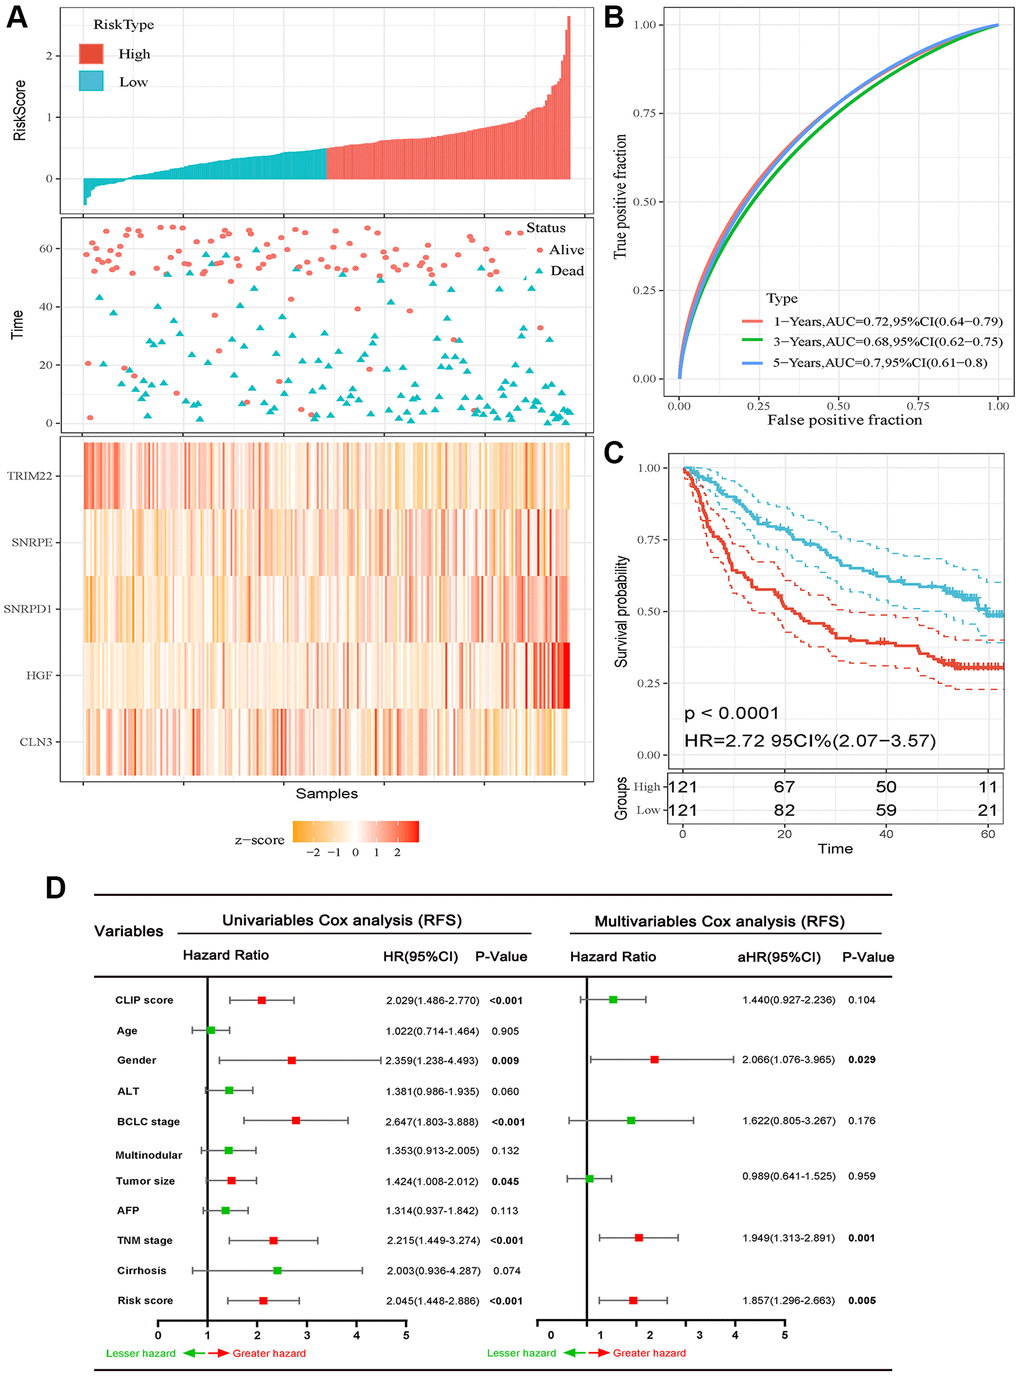 Prognostic analysis of the five-autophagy-related gene signature model in the training set (GSE14520 dataset). (A) Risk score and mRNA expressed heatmap of the five-gene signature. (B) Time-dependent ROC curves of the five-gene signature in the training set. (C) High-risk score correlated with poor RFS probability in the training set. (D) Results of the univariate and multivariate Cox regression analyses regarding of RFS in the training set.